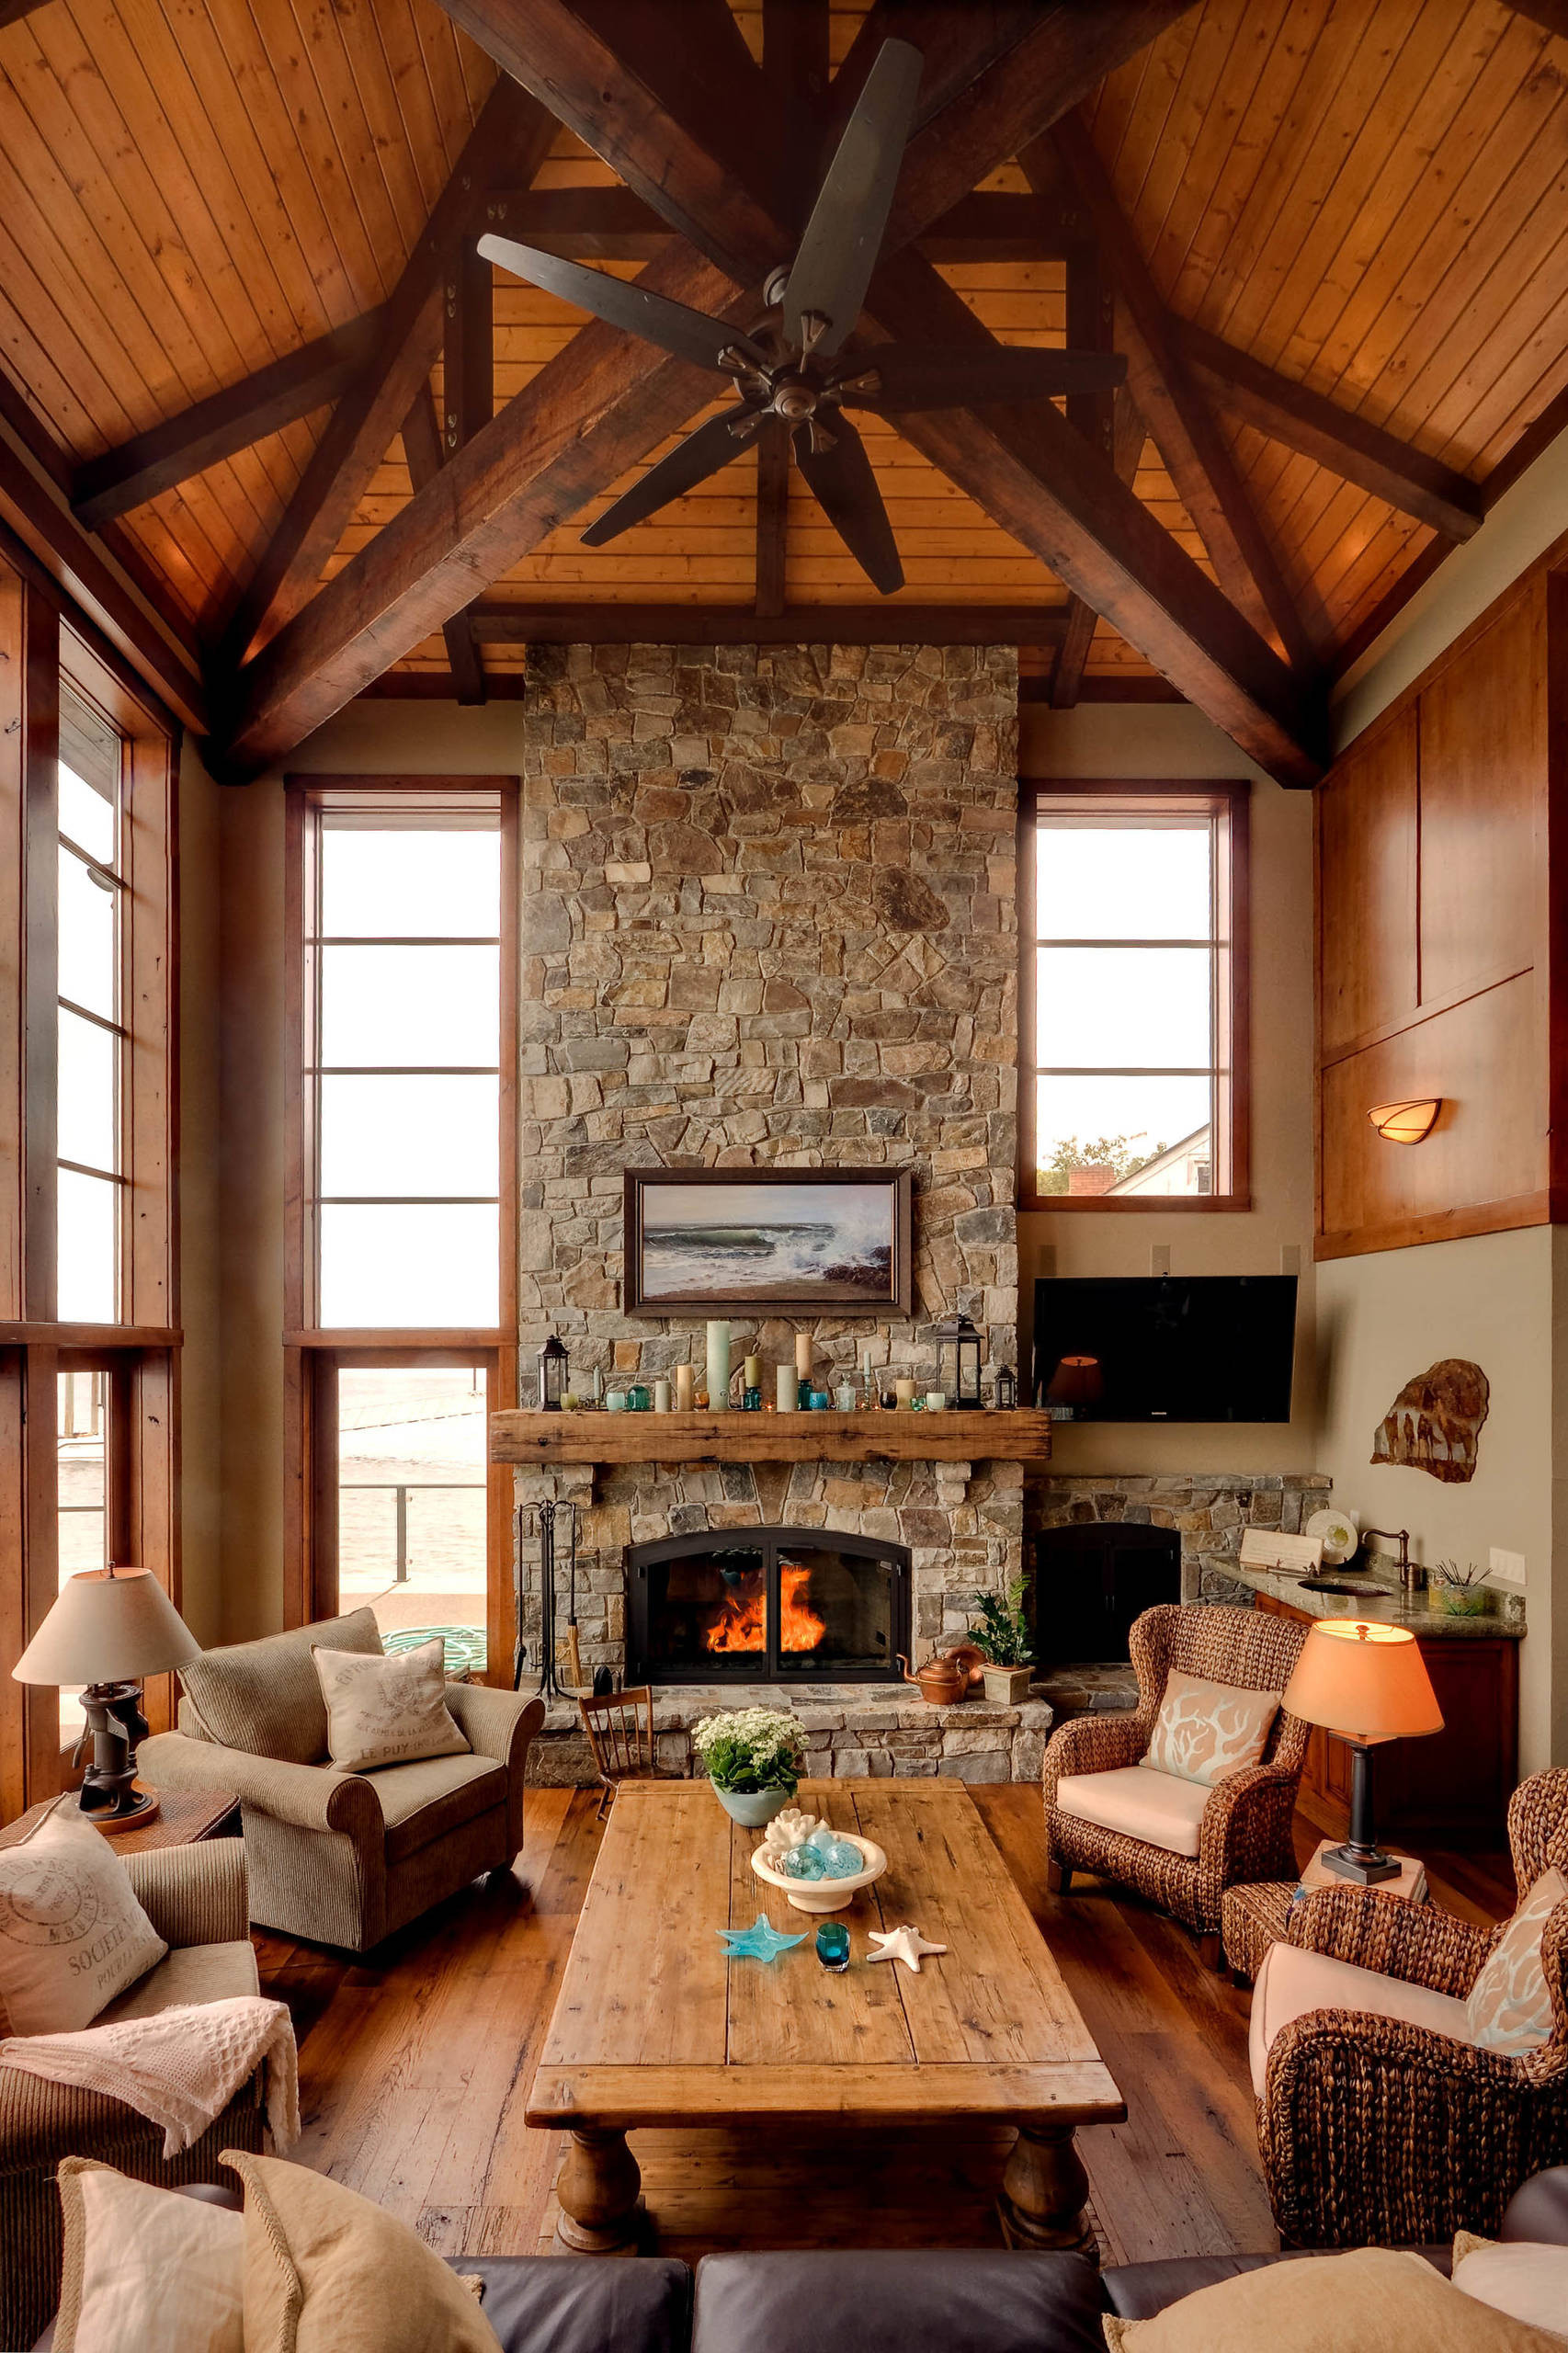 Living Room Rustic
 16 Sophisticated Rustic Living Room Designs You Won t Turn